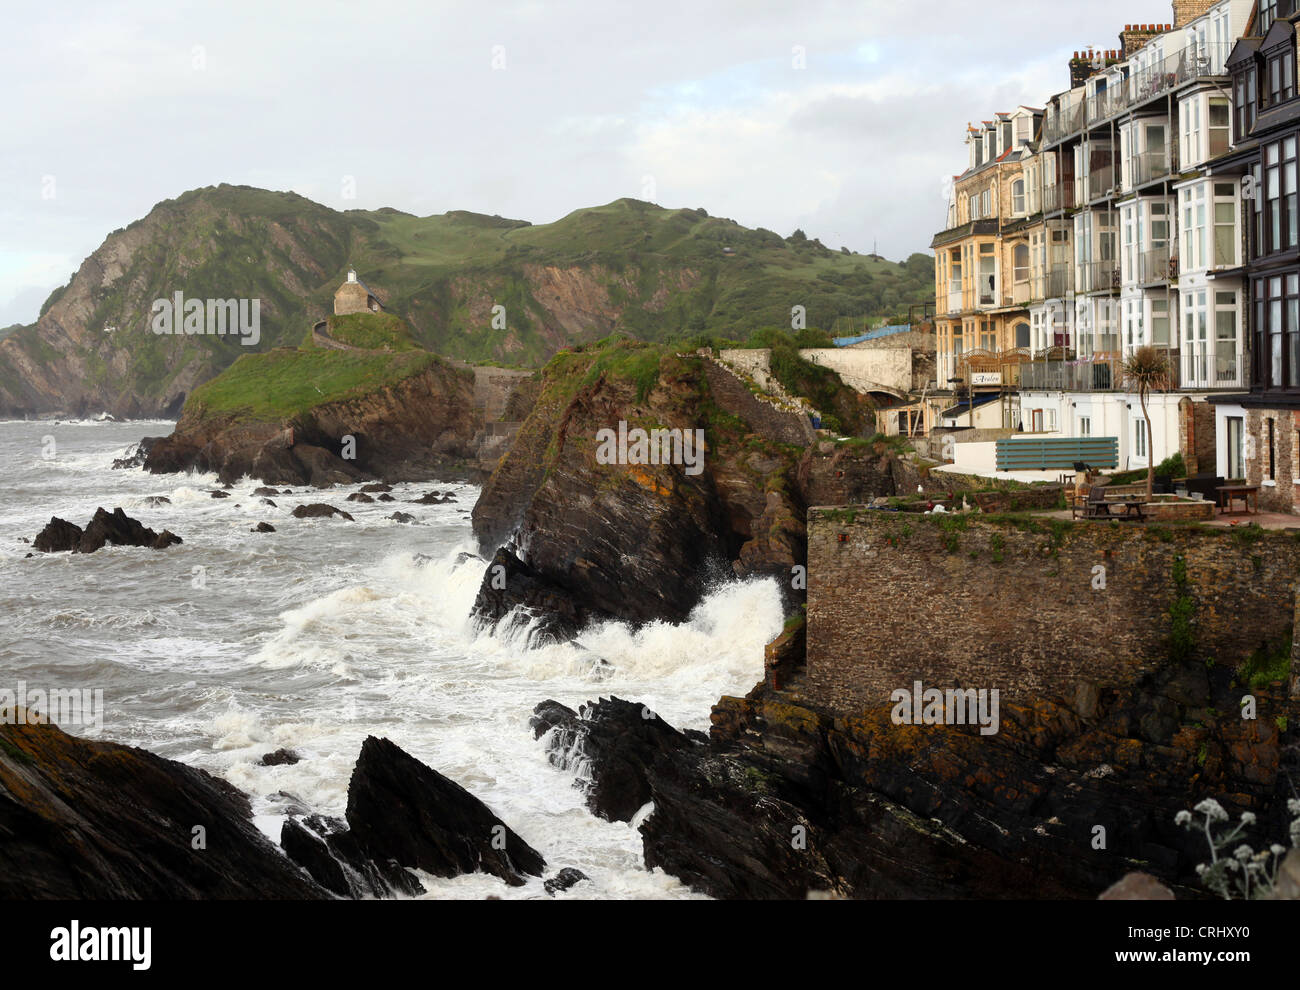 General view of the St Nicholas Chapel on Lantern Hill pictured in Ilfracombe Harbour in Devon, United Kingdom, June 8th, 2012. Stock Photo